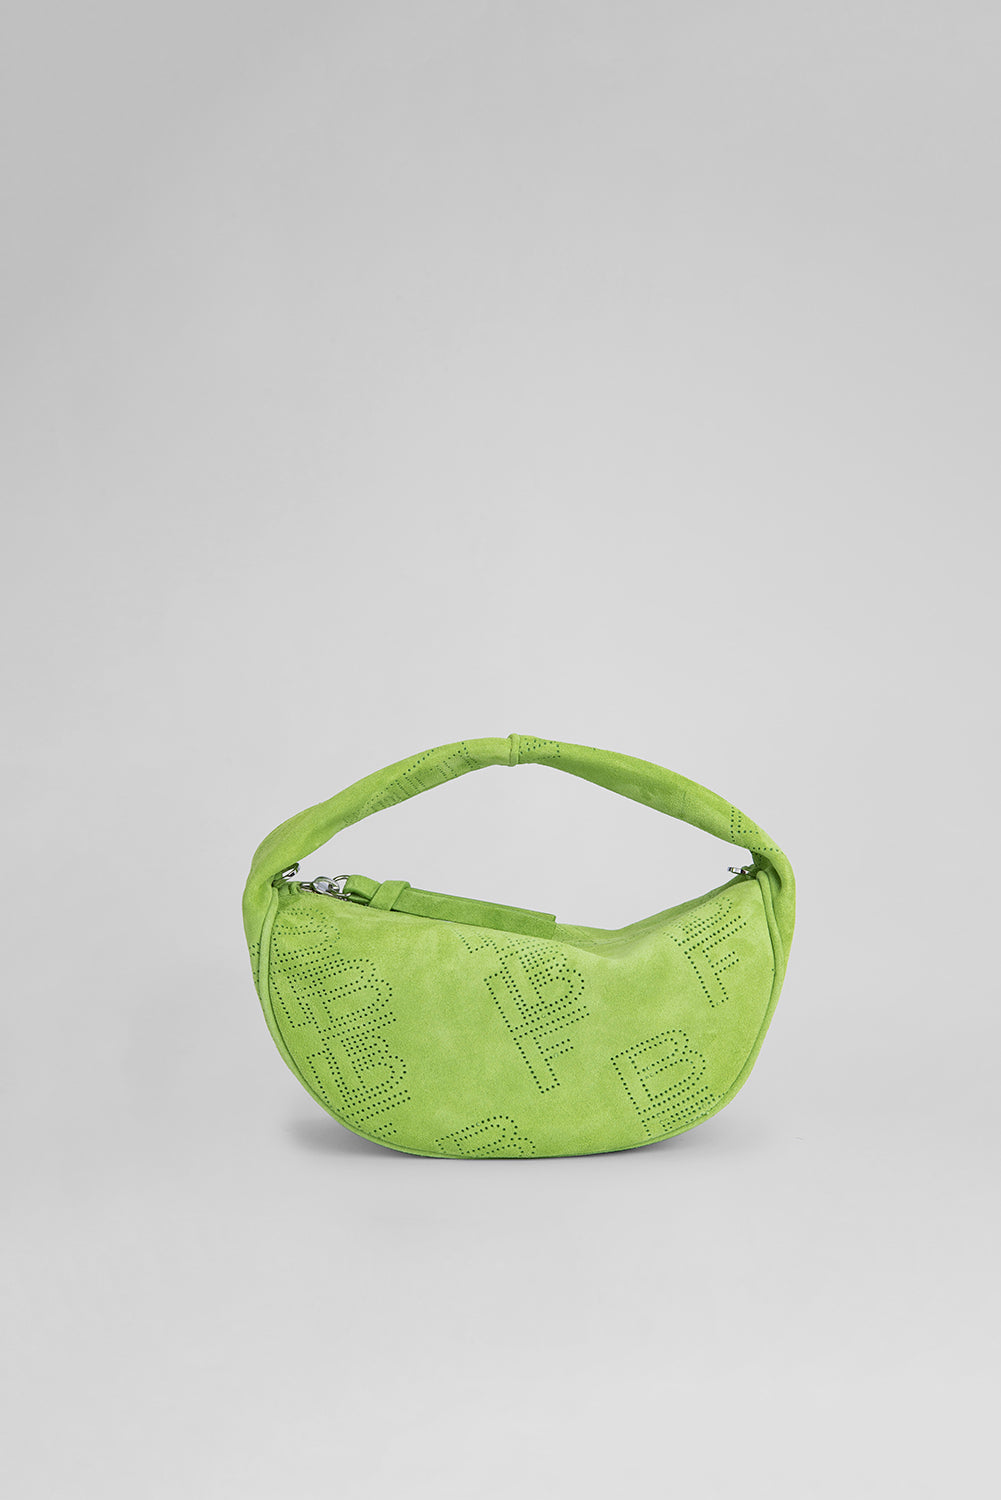 Baby Cush Bright Green Perforated Suede Leather